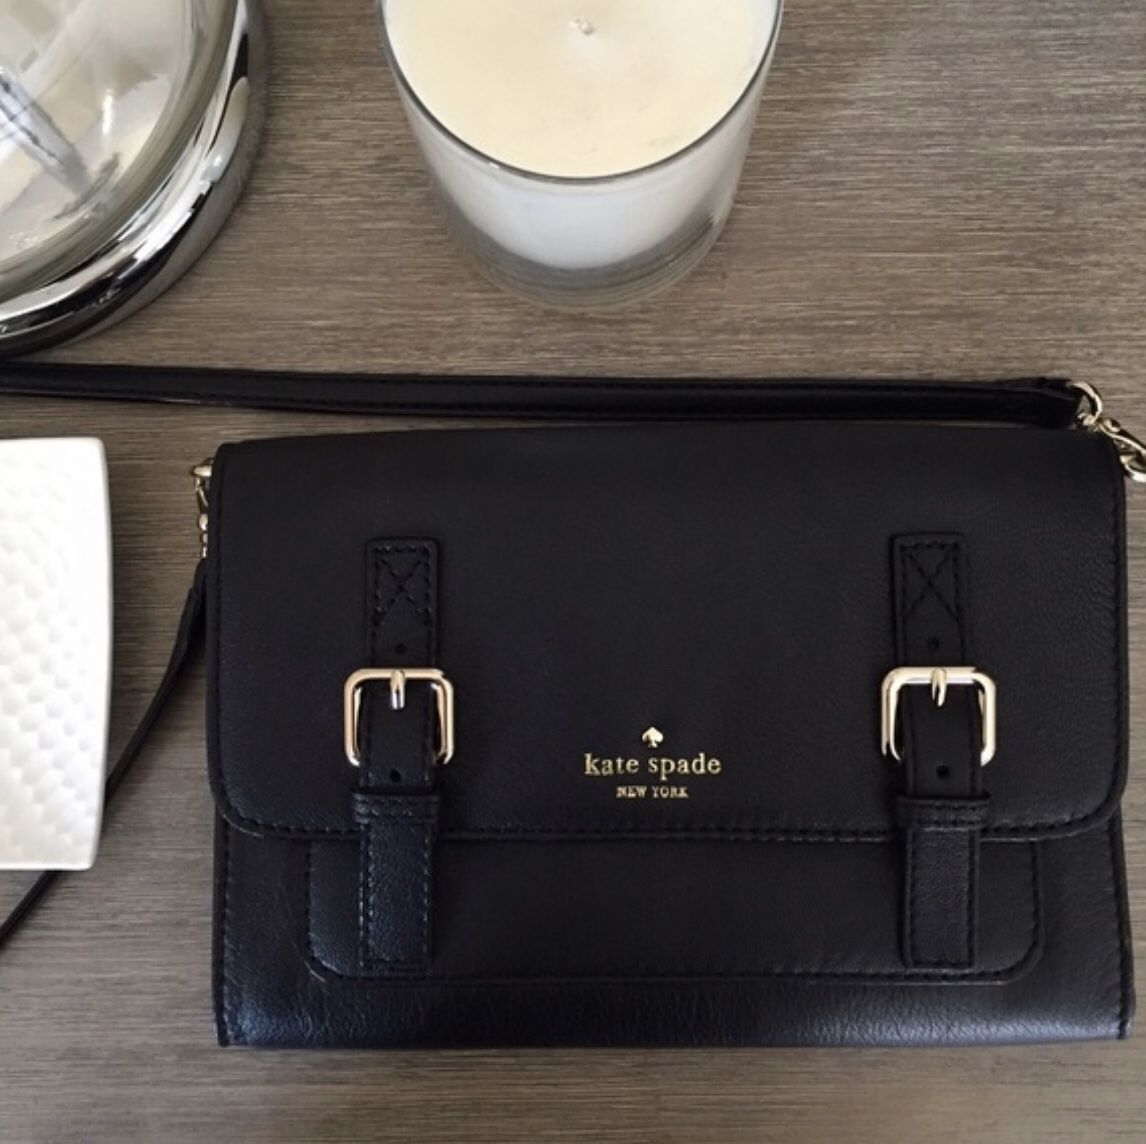 Kate Spade Allen Street Neil bag paid $258 Pristine condition! Leather Crossbody Bag, crafted in matte goat leather, gold printed kate spade new york